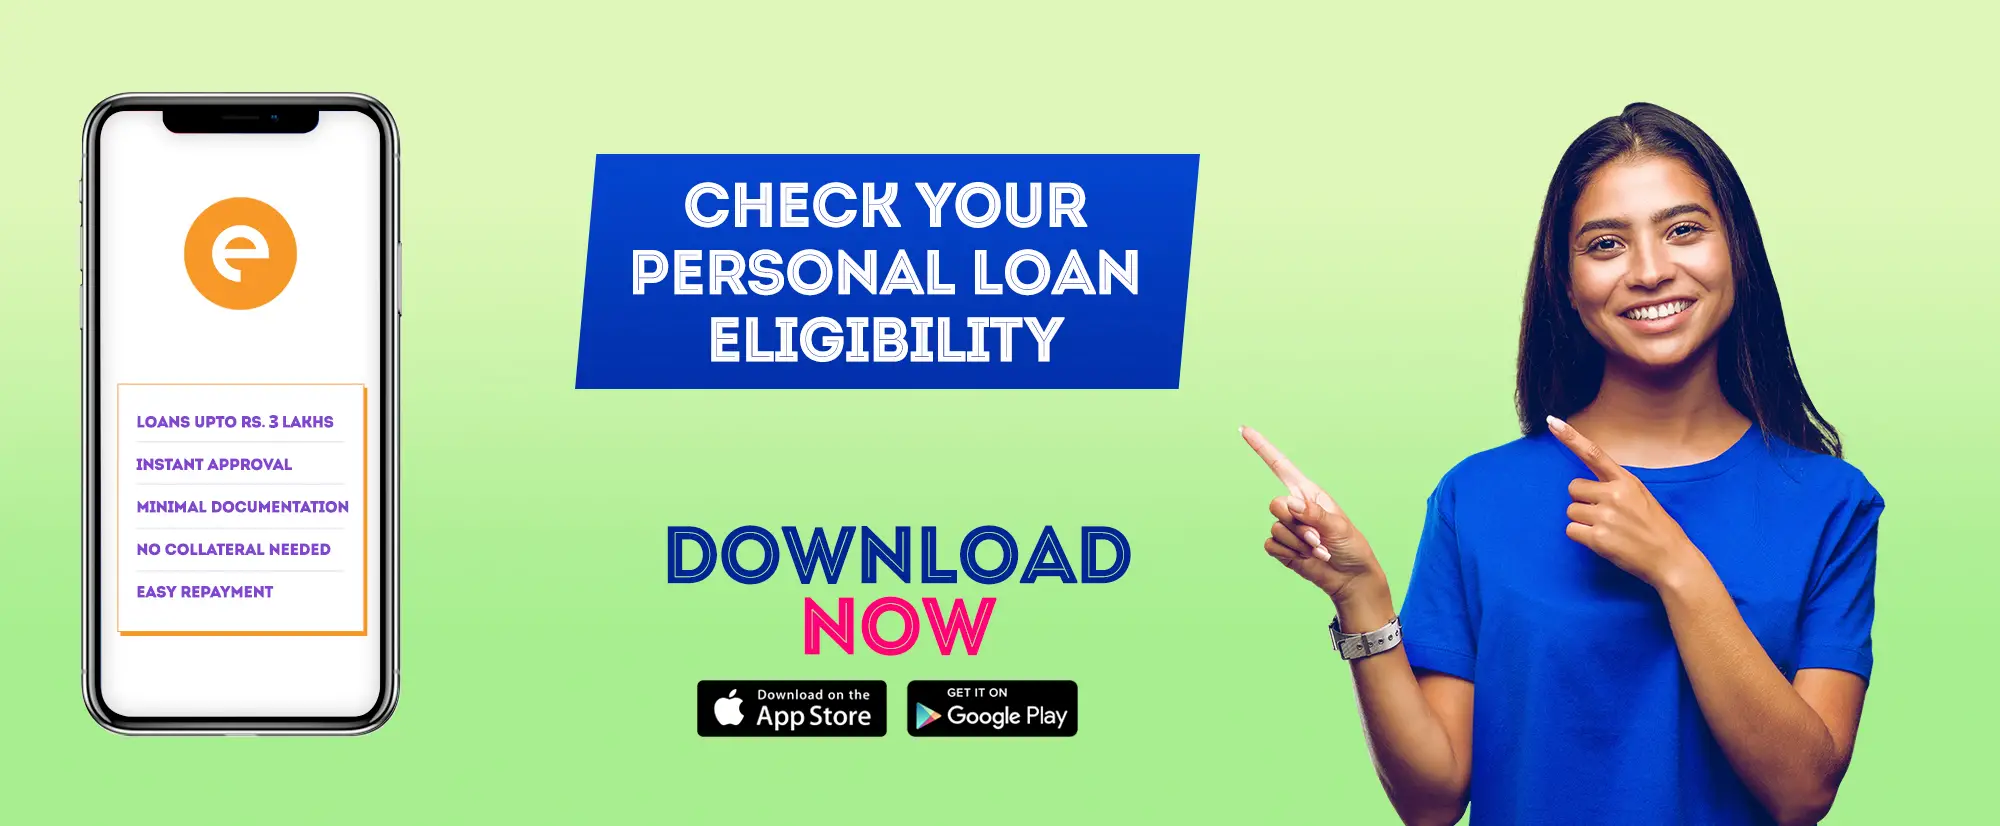 Why You Should Check your Personal Loan Eligibility